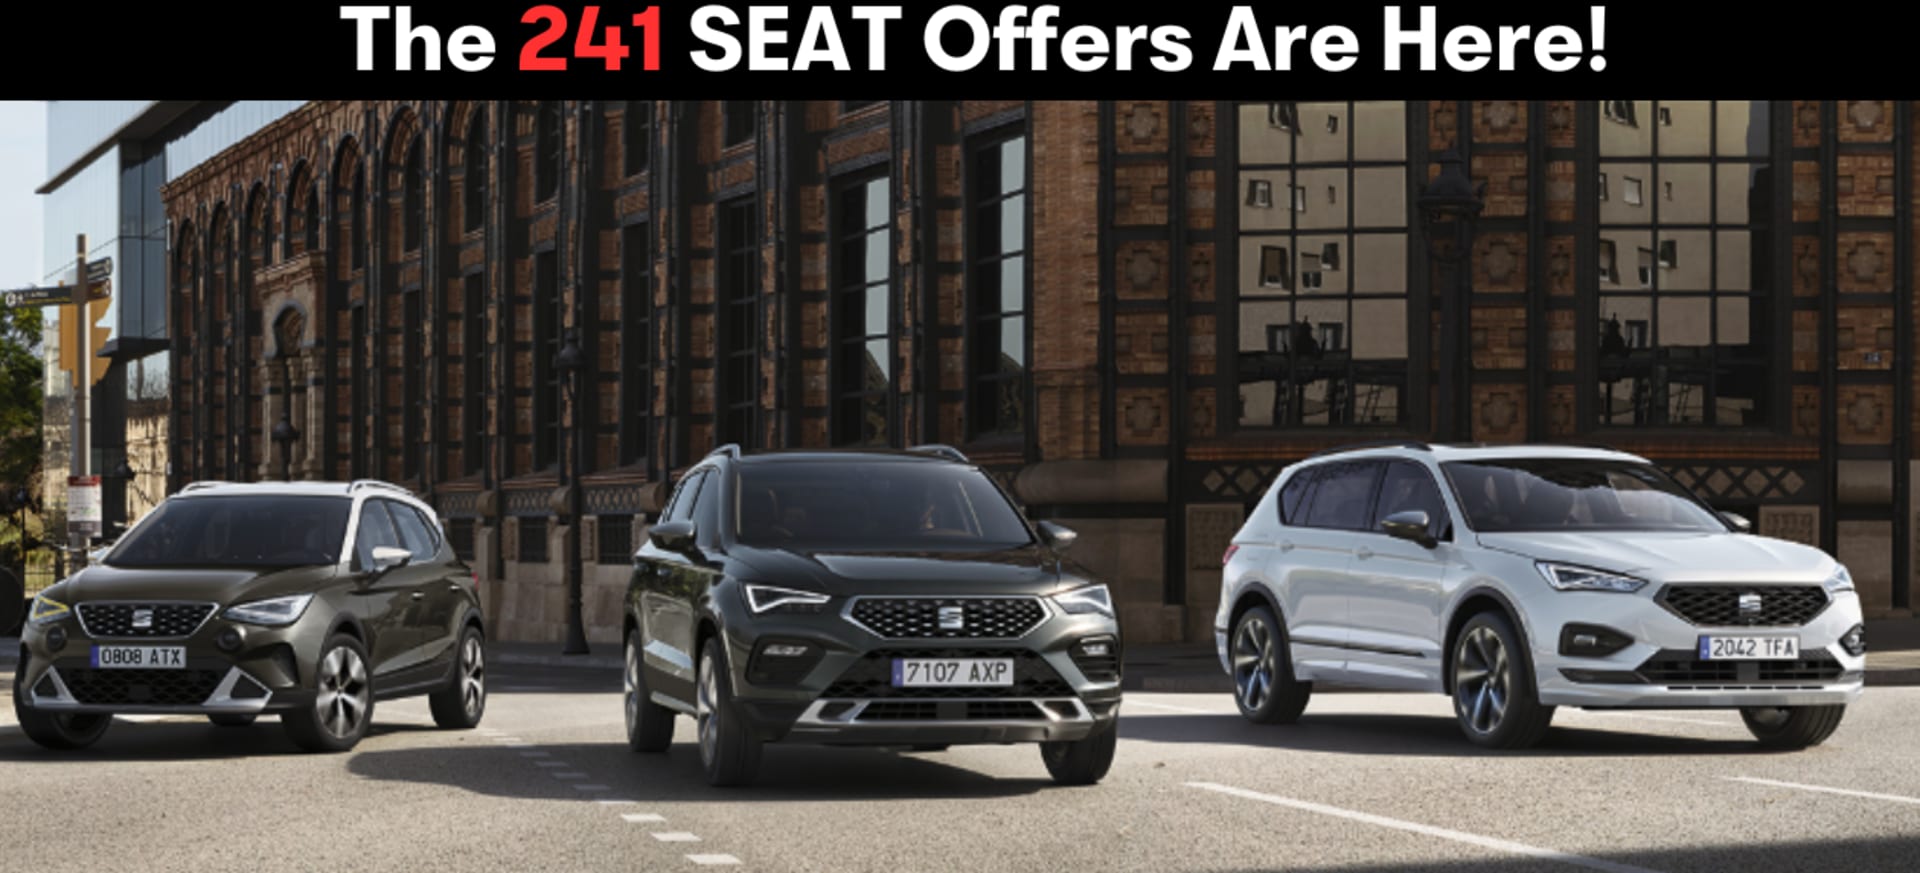 241 SEAT Offers